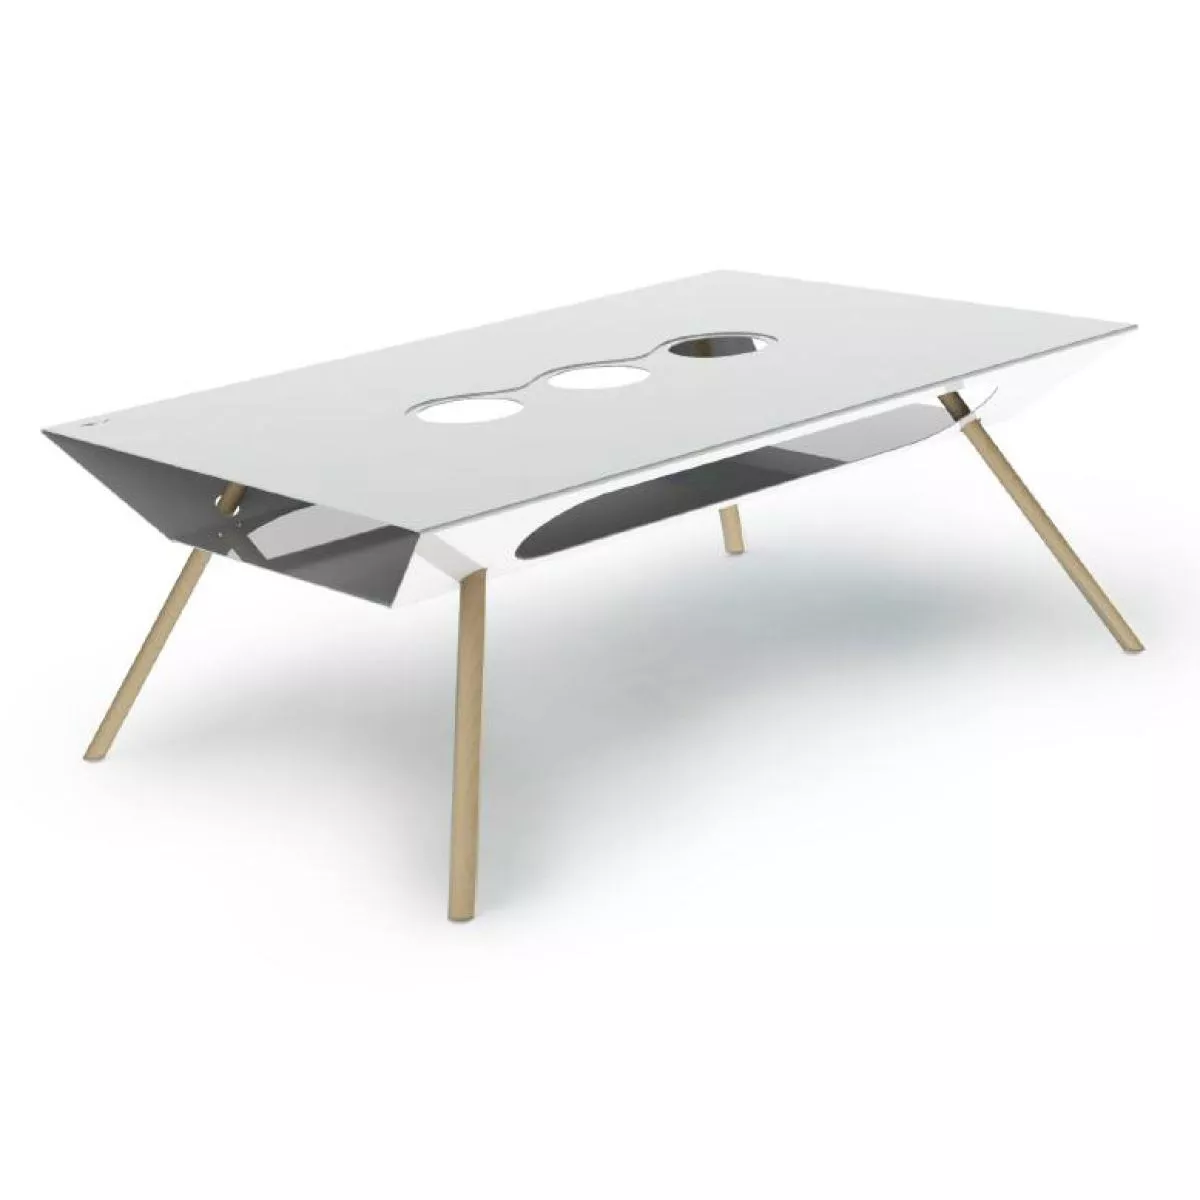 White stainless steel coffee table with three porcelain vessels (119 x 80 cm)